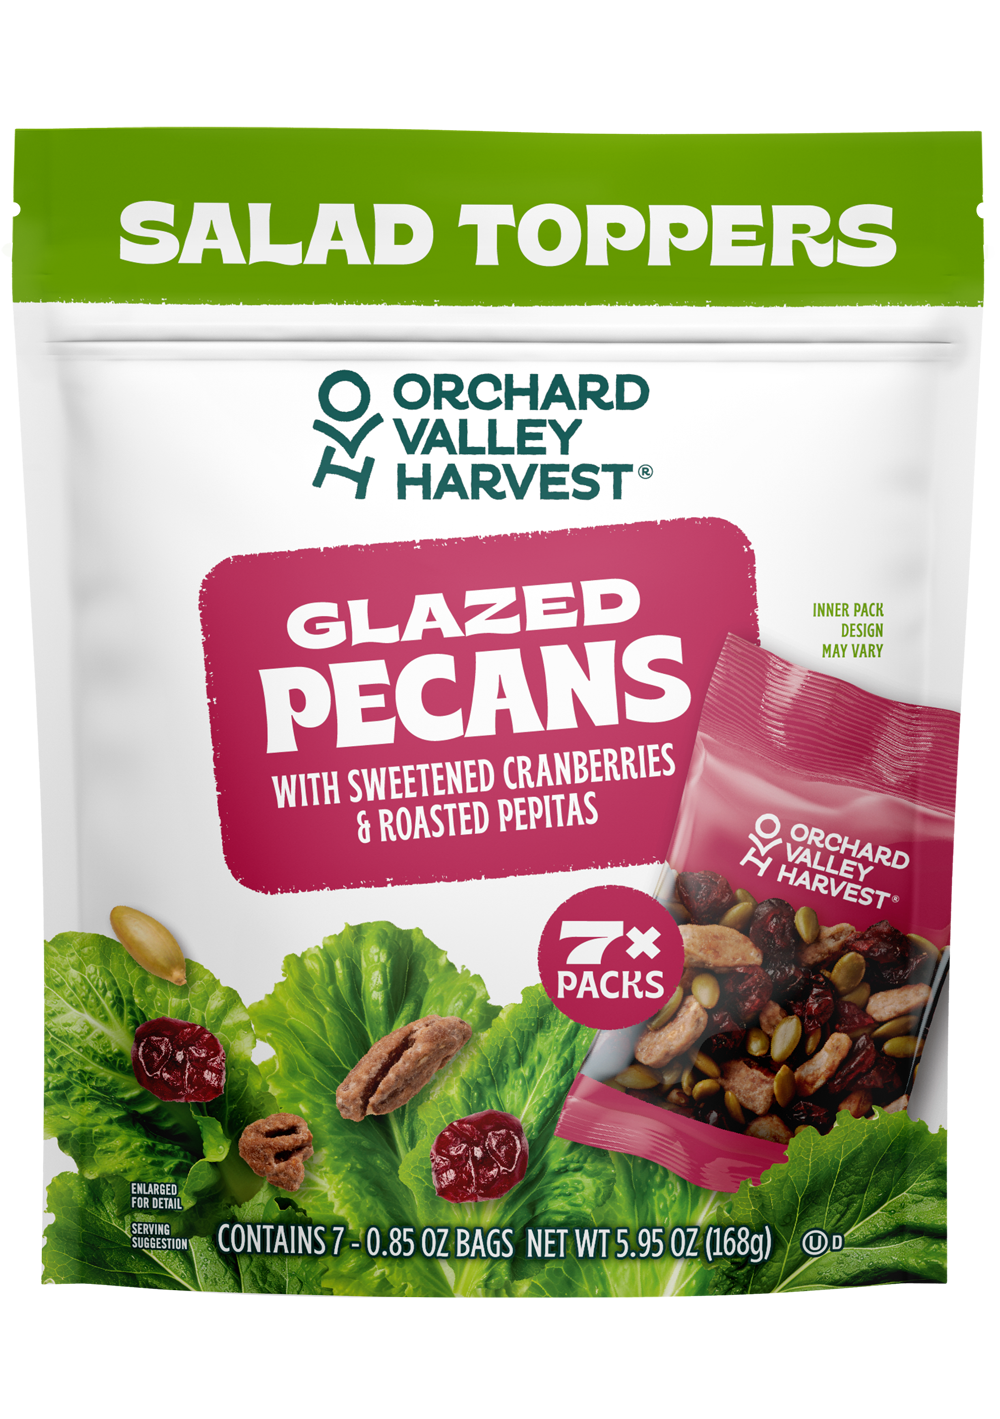 Glazed Pecans With Sweetened Cranberries & Pepitas – Multi-Pack